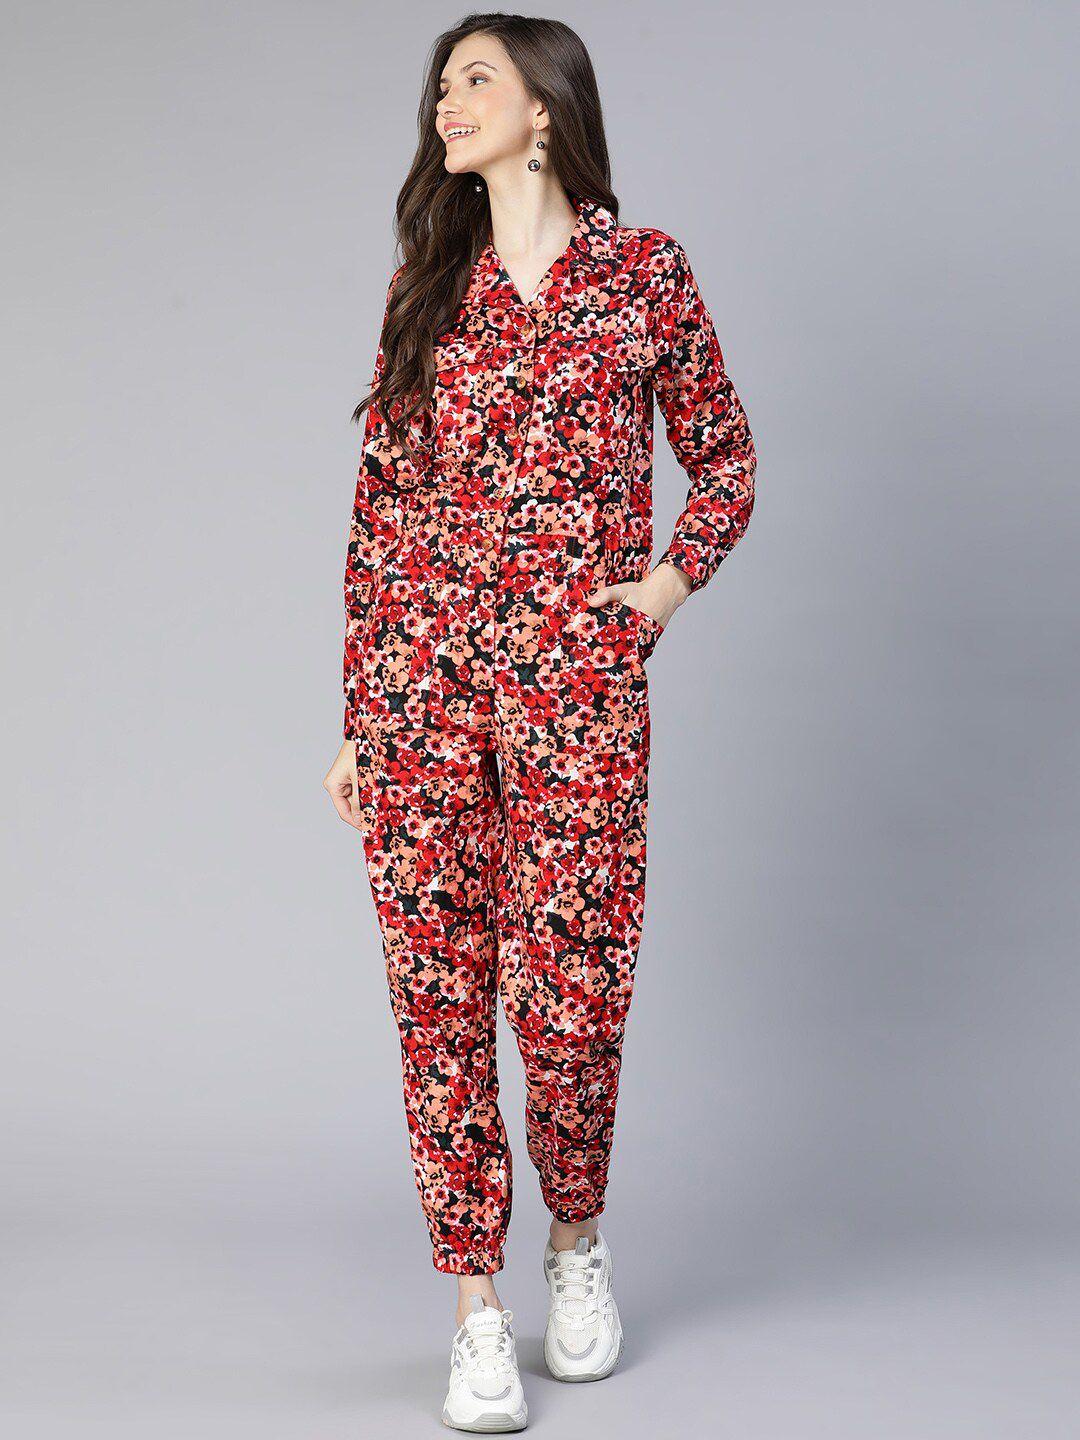 oxolloxo women red & black printed basic jumpsuit